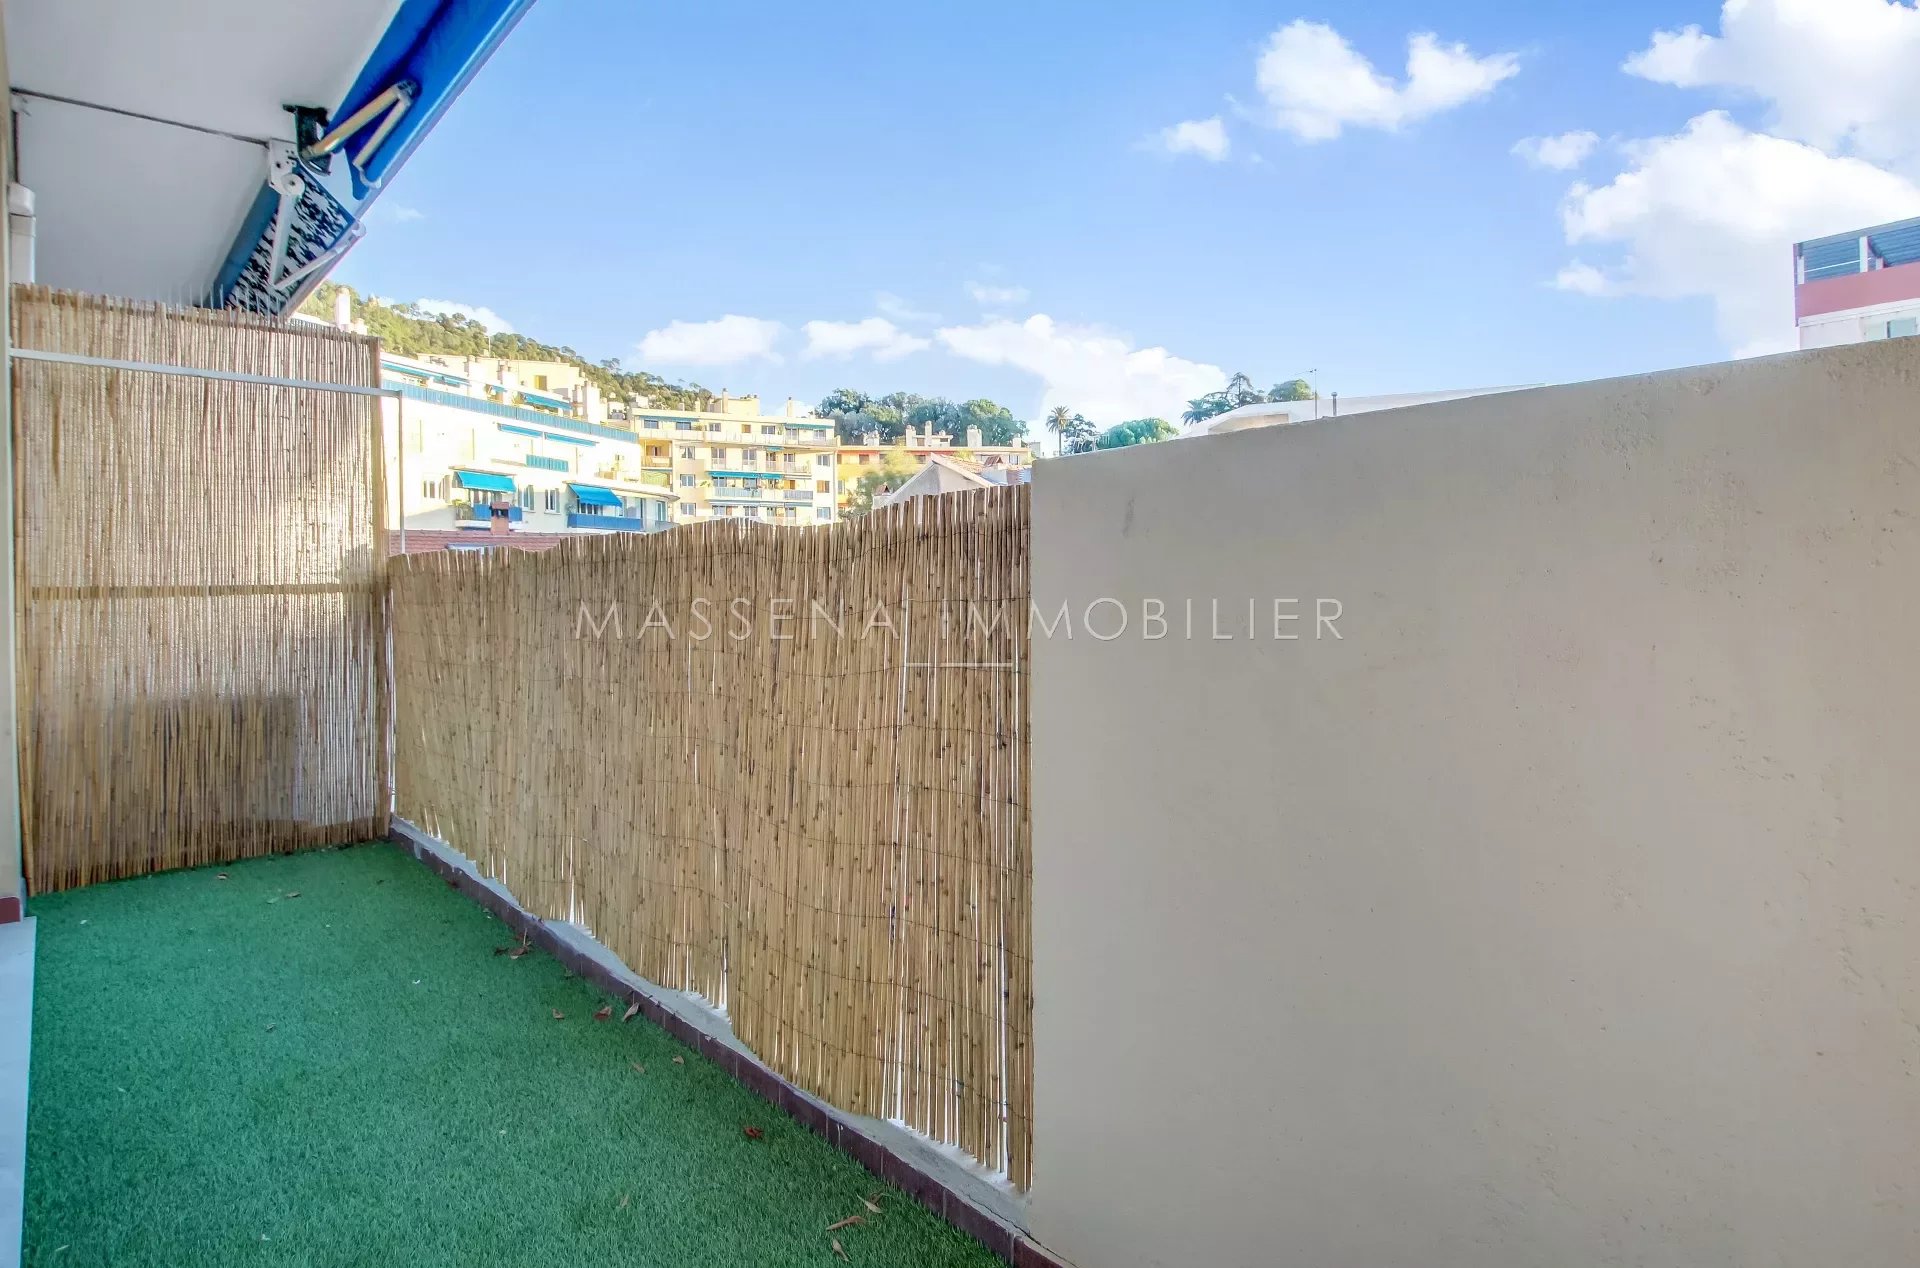 Nice Riquier - Renovated 2 bedroom apartment with terrace and balcony